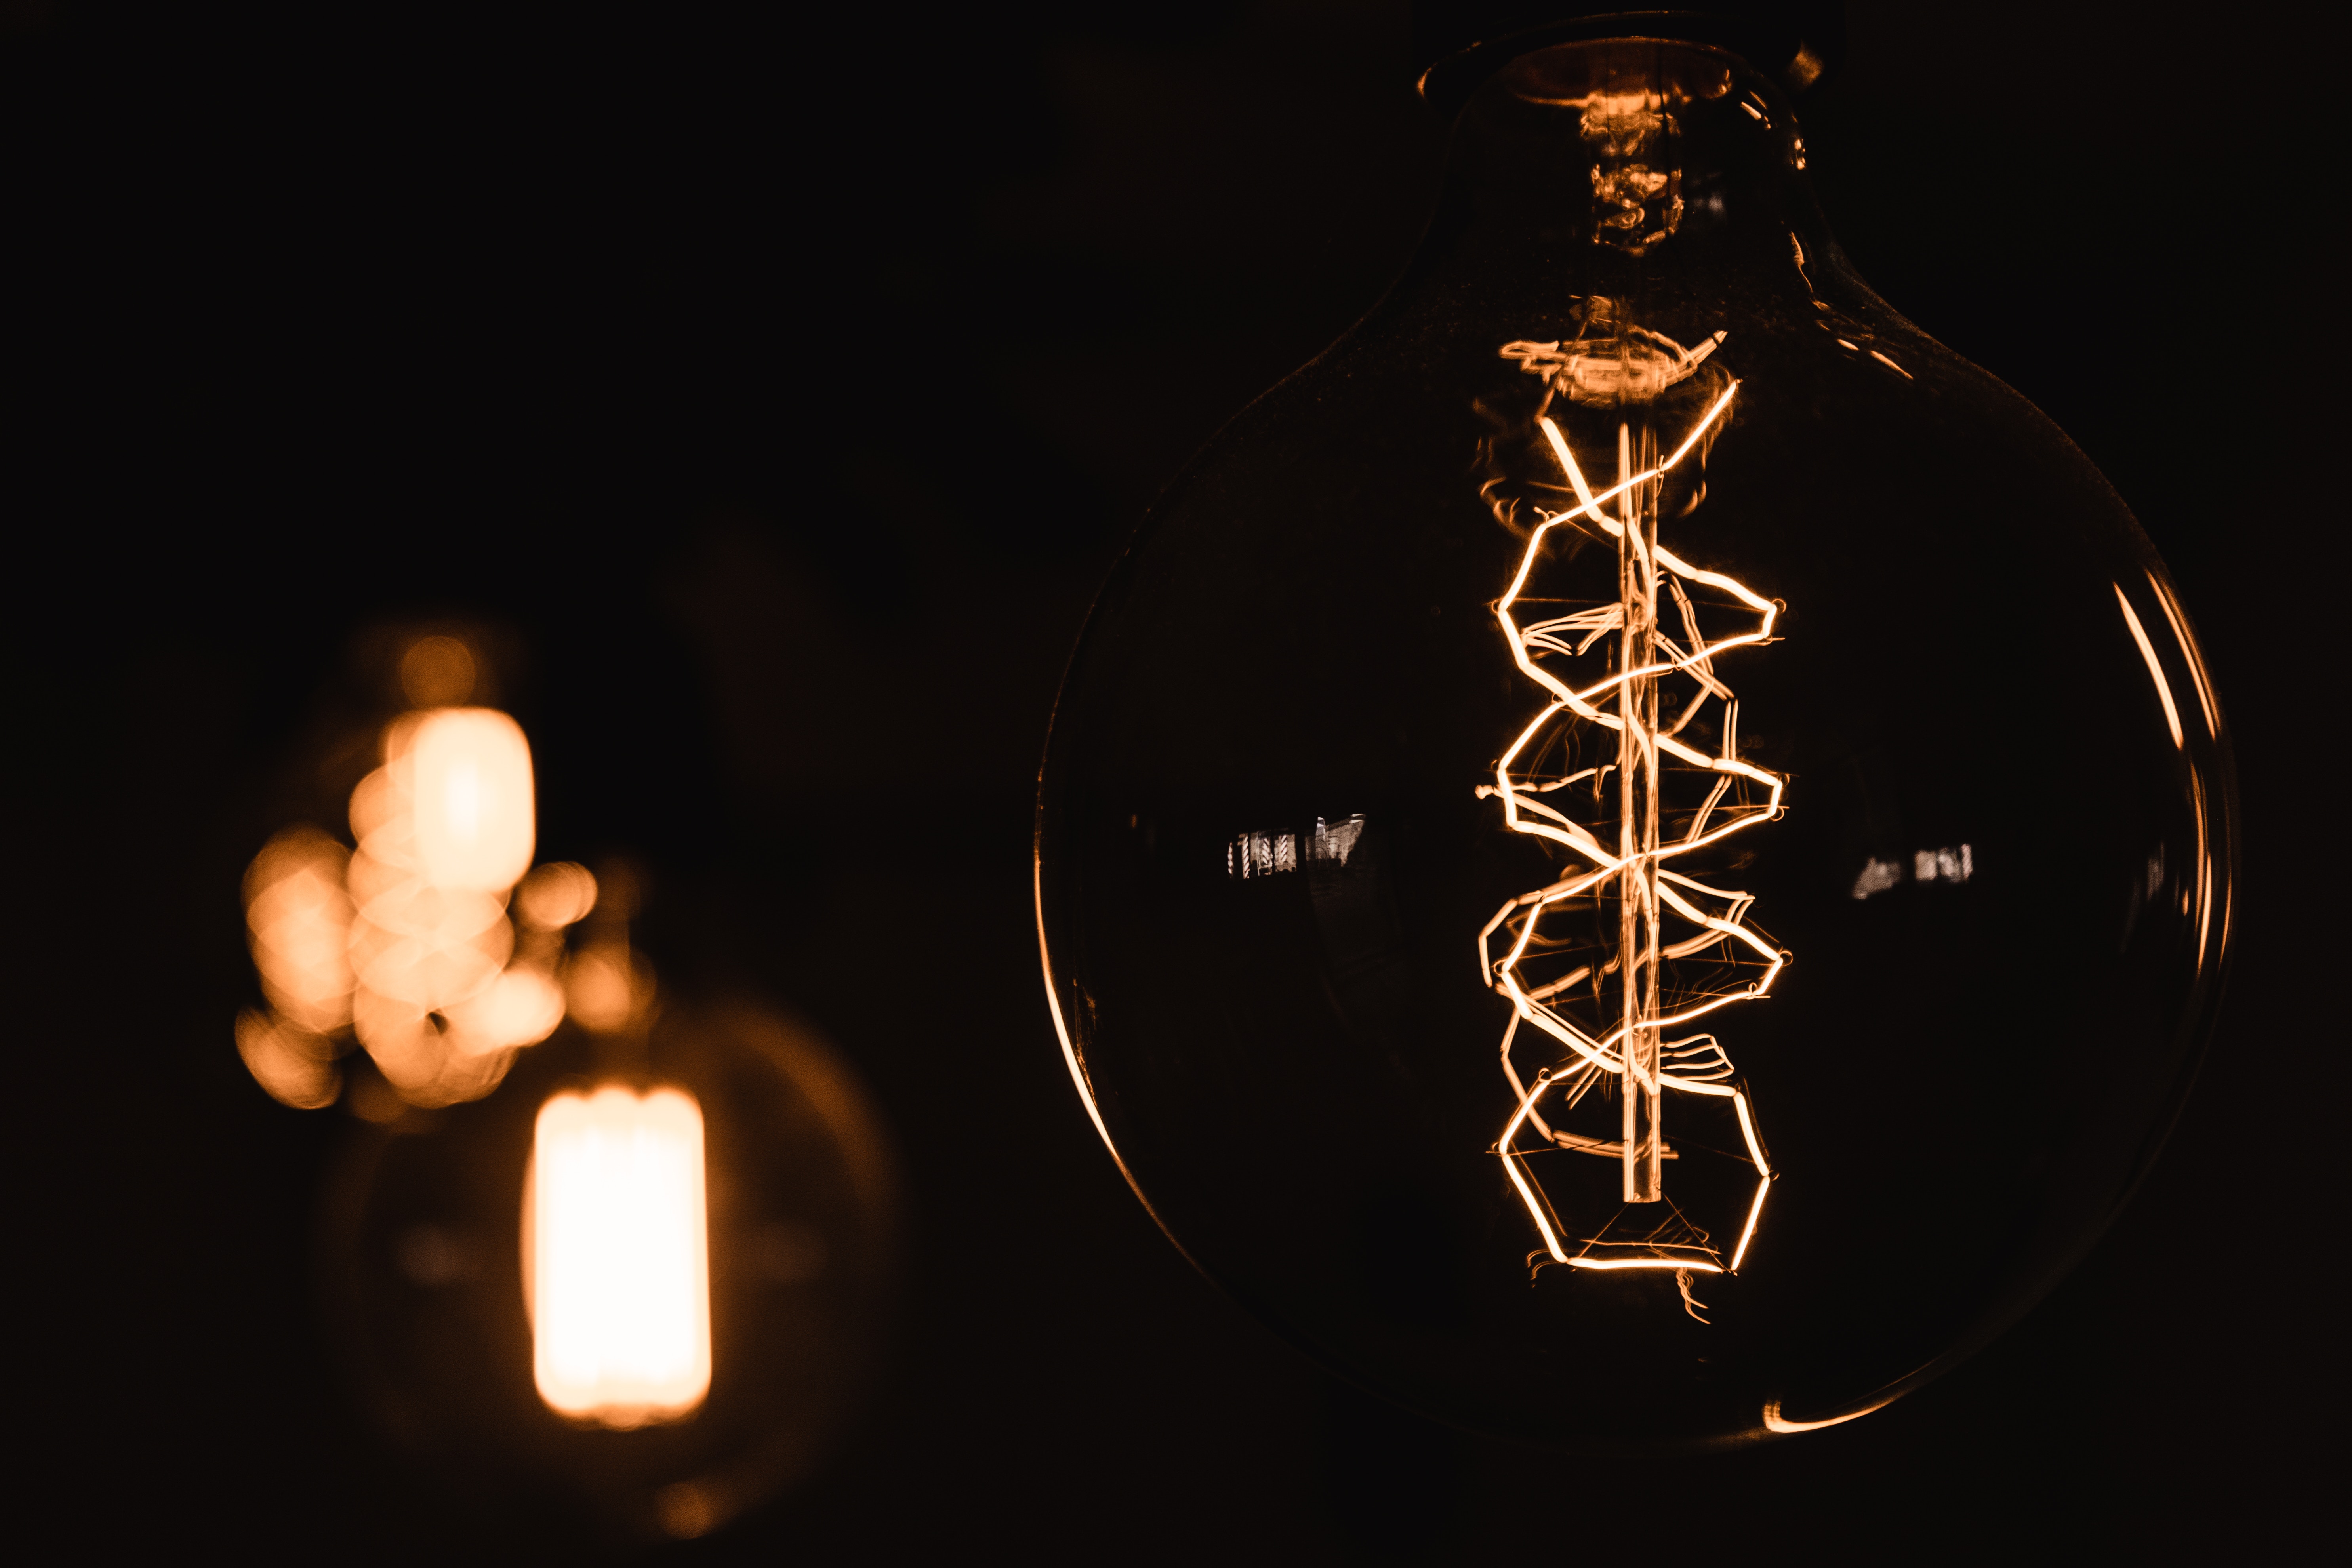 Edison style light bulb with double helix filament